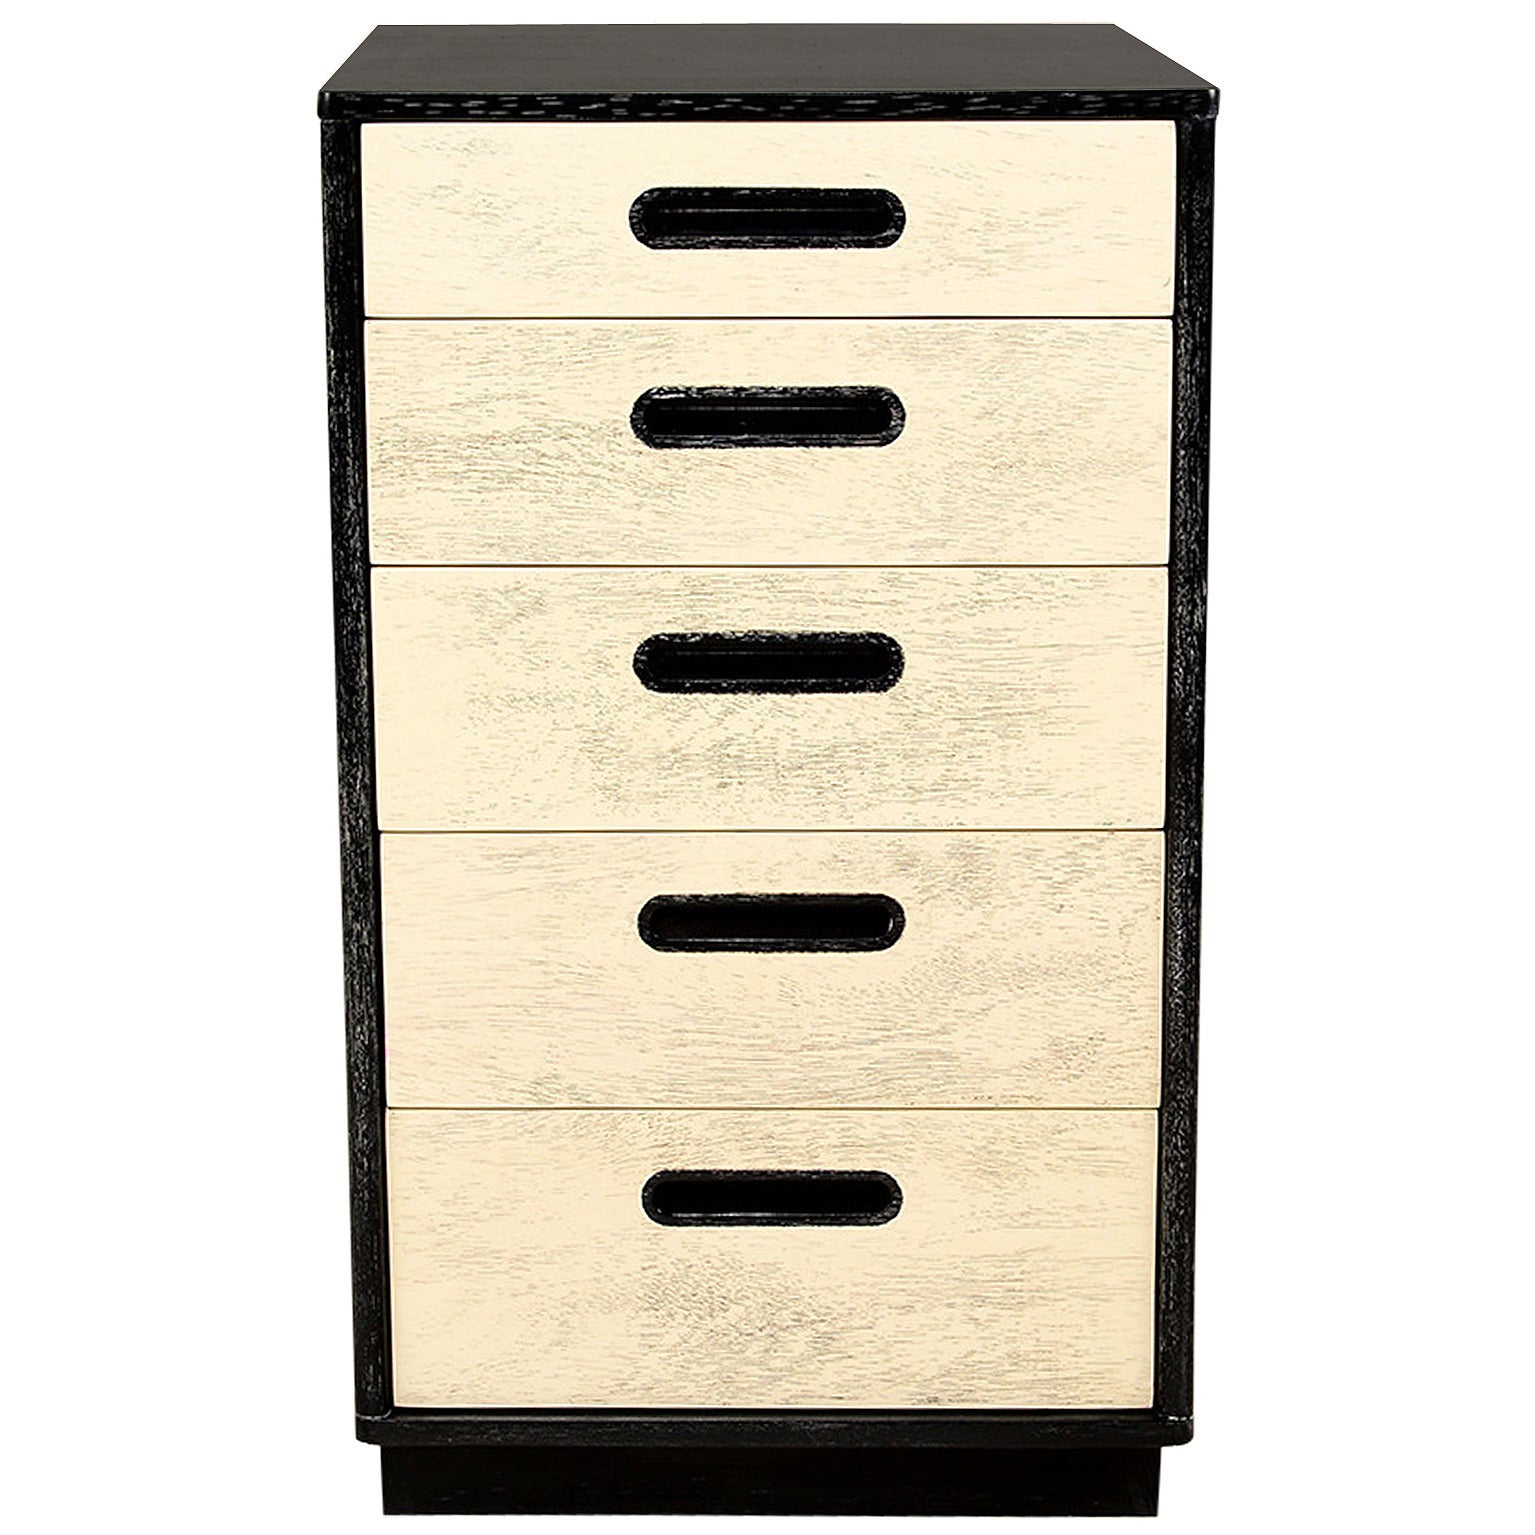 Small Chest of Drawers by Edward Wormley for Dunbar